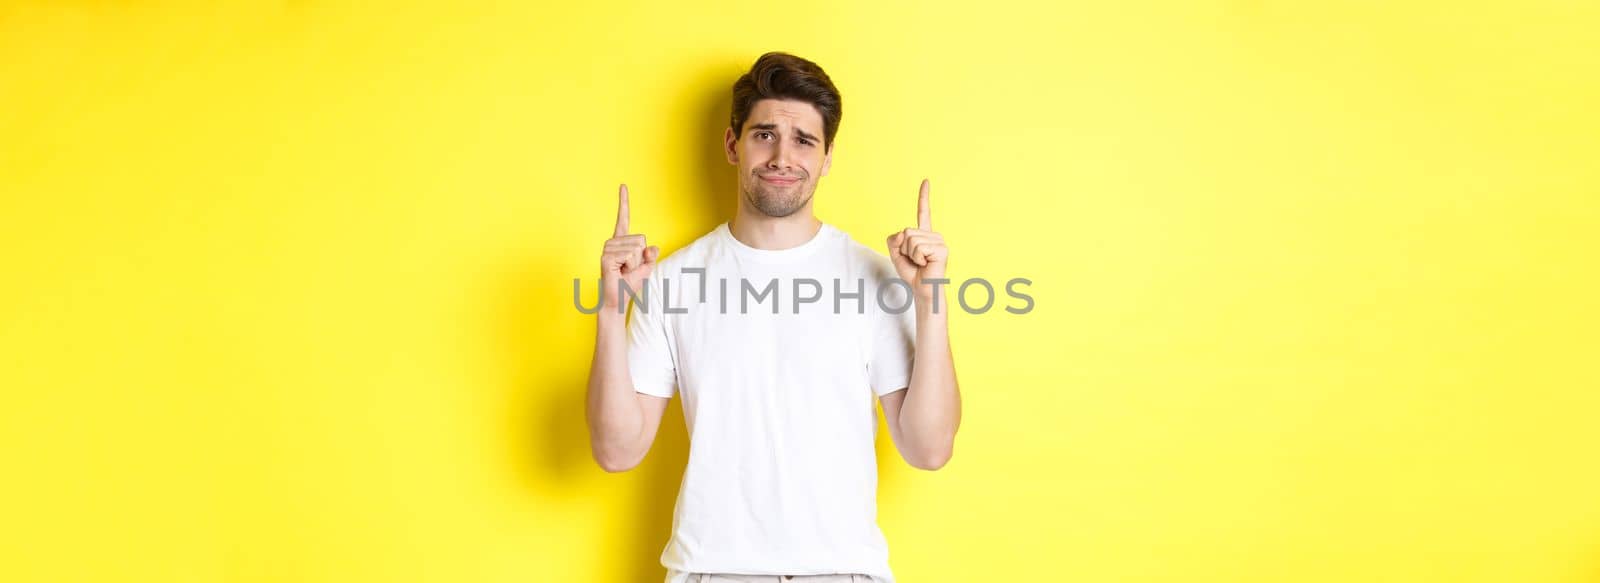 Unamused handsome guy frowning, pointing fingers up at something bad, standing skeptical against yellow background.